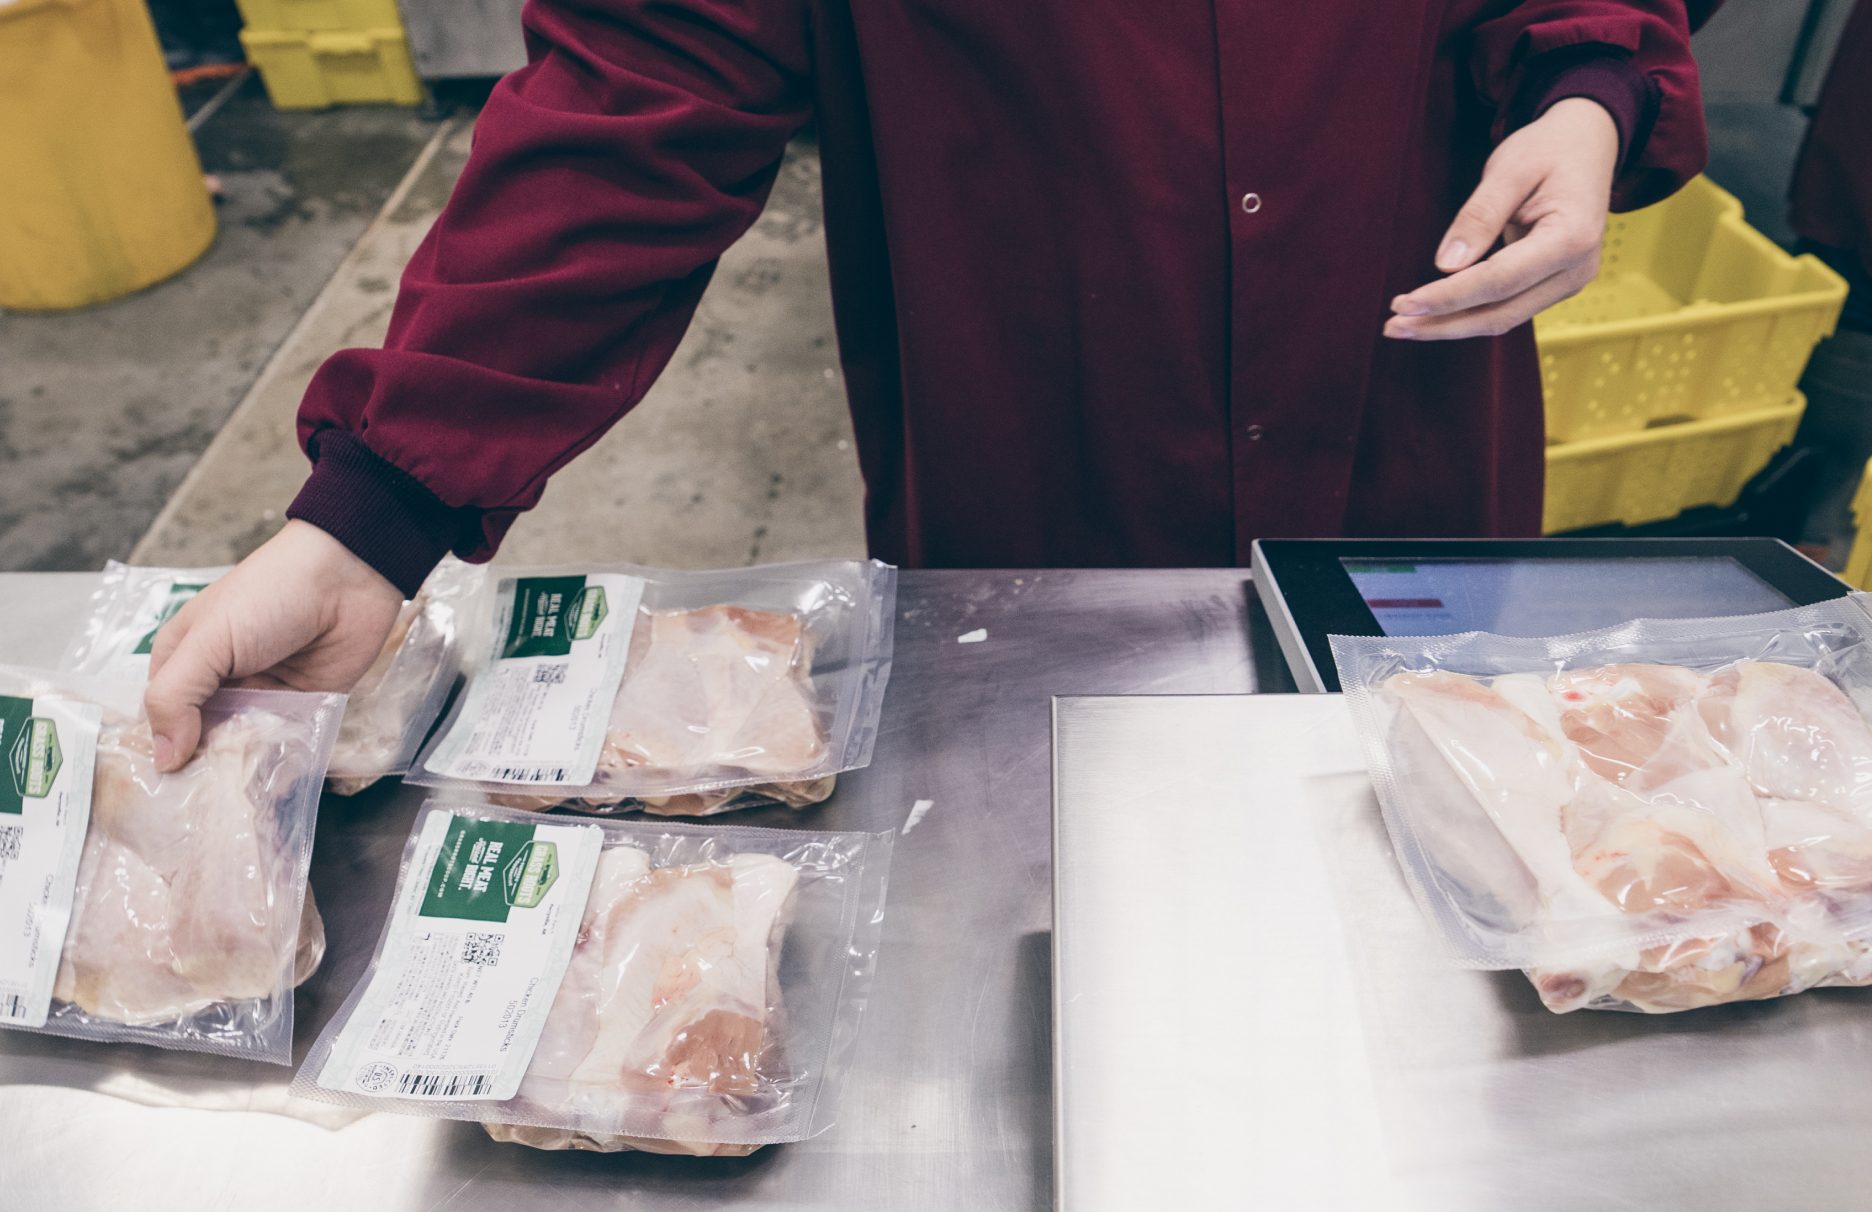 Shoulder down view of person wearing a maroon shirt packaging cuts of meats in plastic packages.